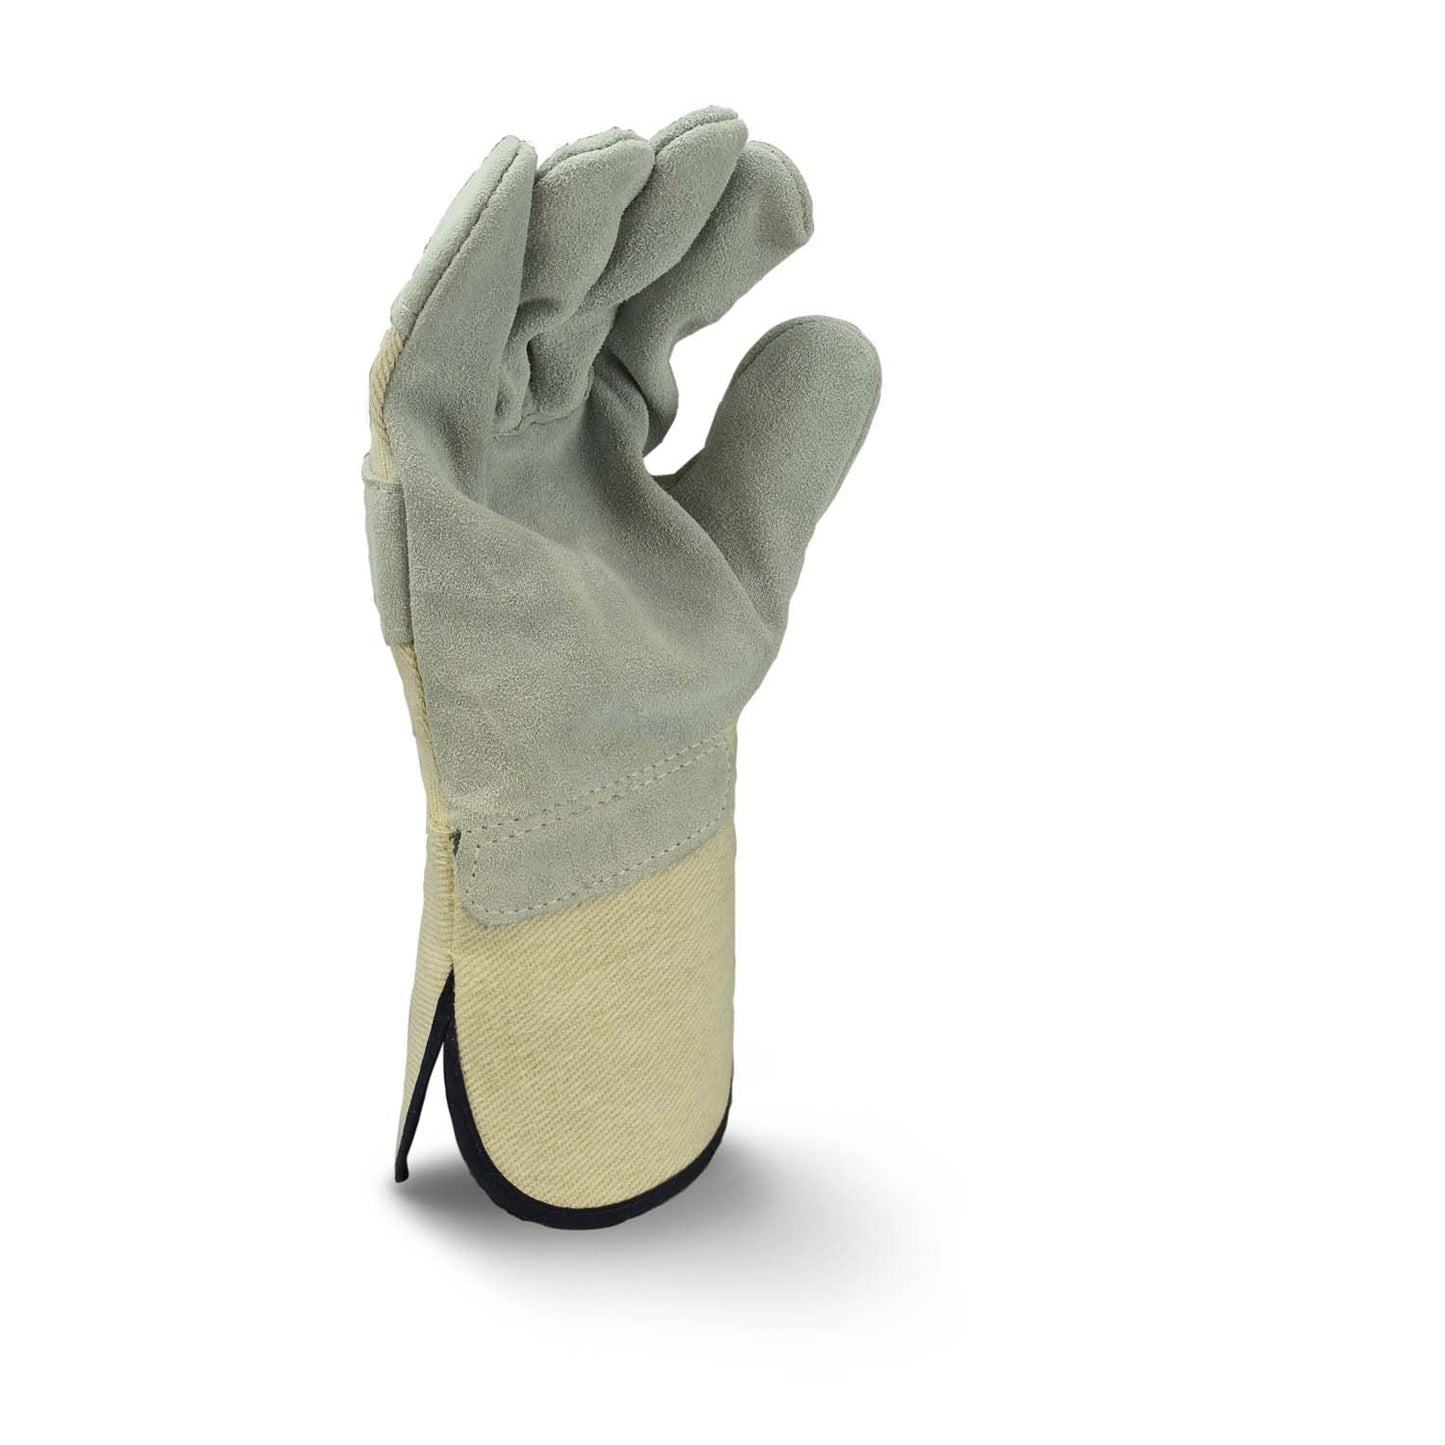 RADIANS RWG3400WG SIDE SPLIT GRAY COWHIDE LEATHER GLOVE WITH GAUNTLET CUFF